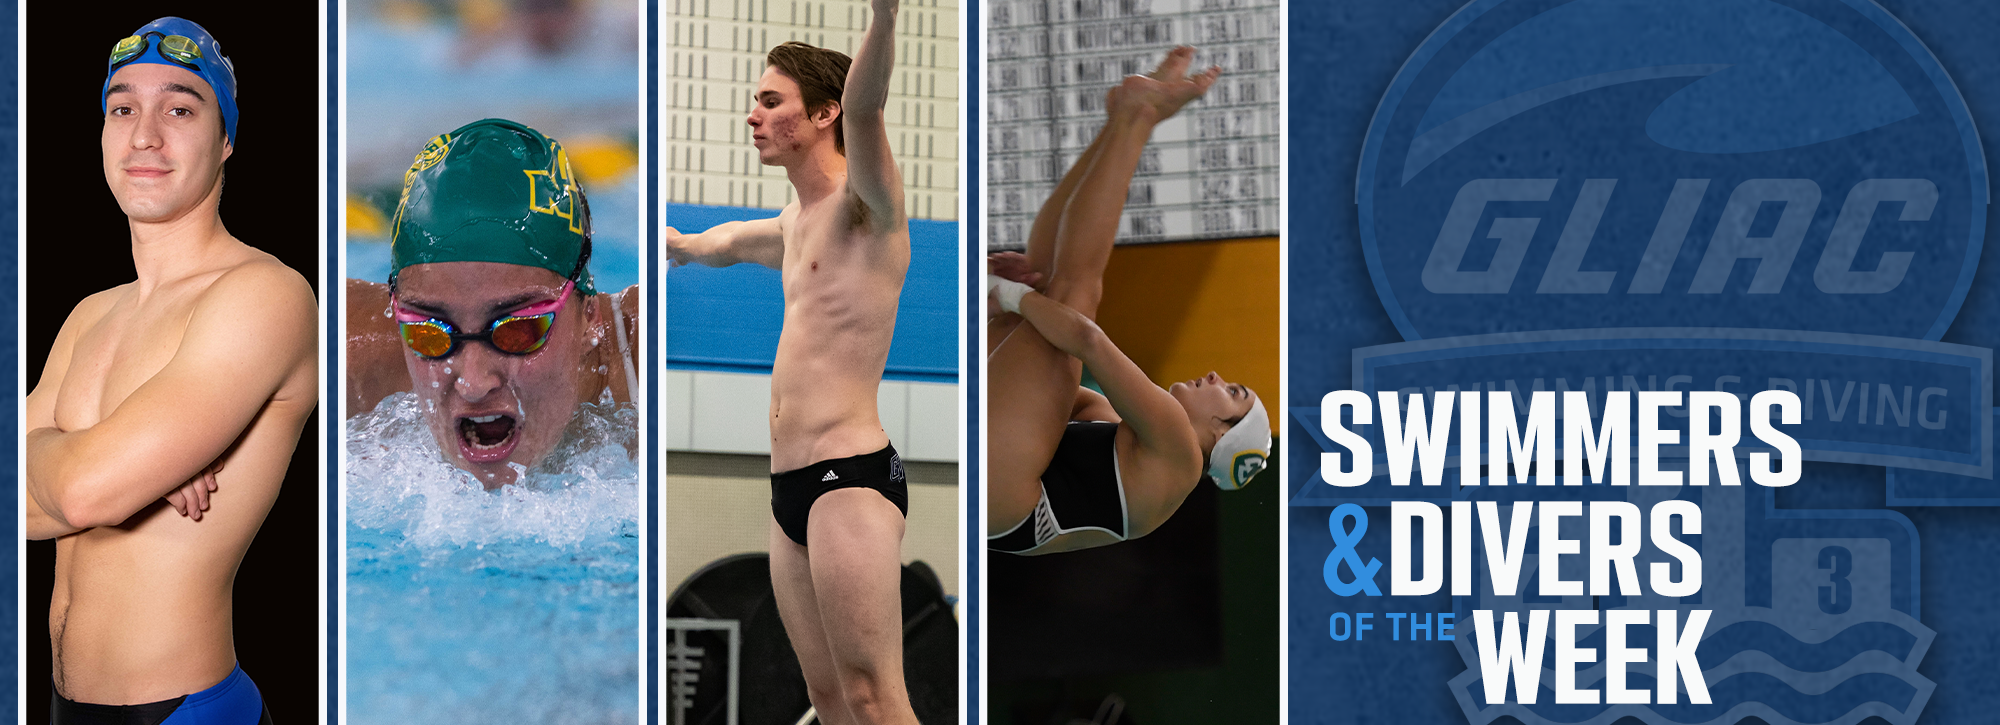 GLIAC honors men's and women's swimmers and divers of the week